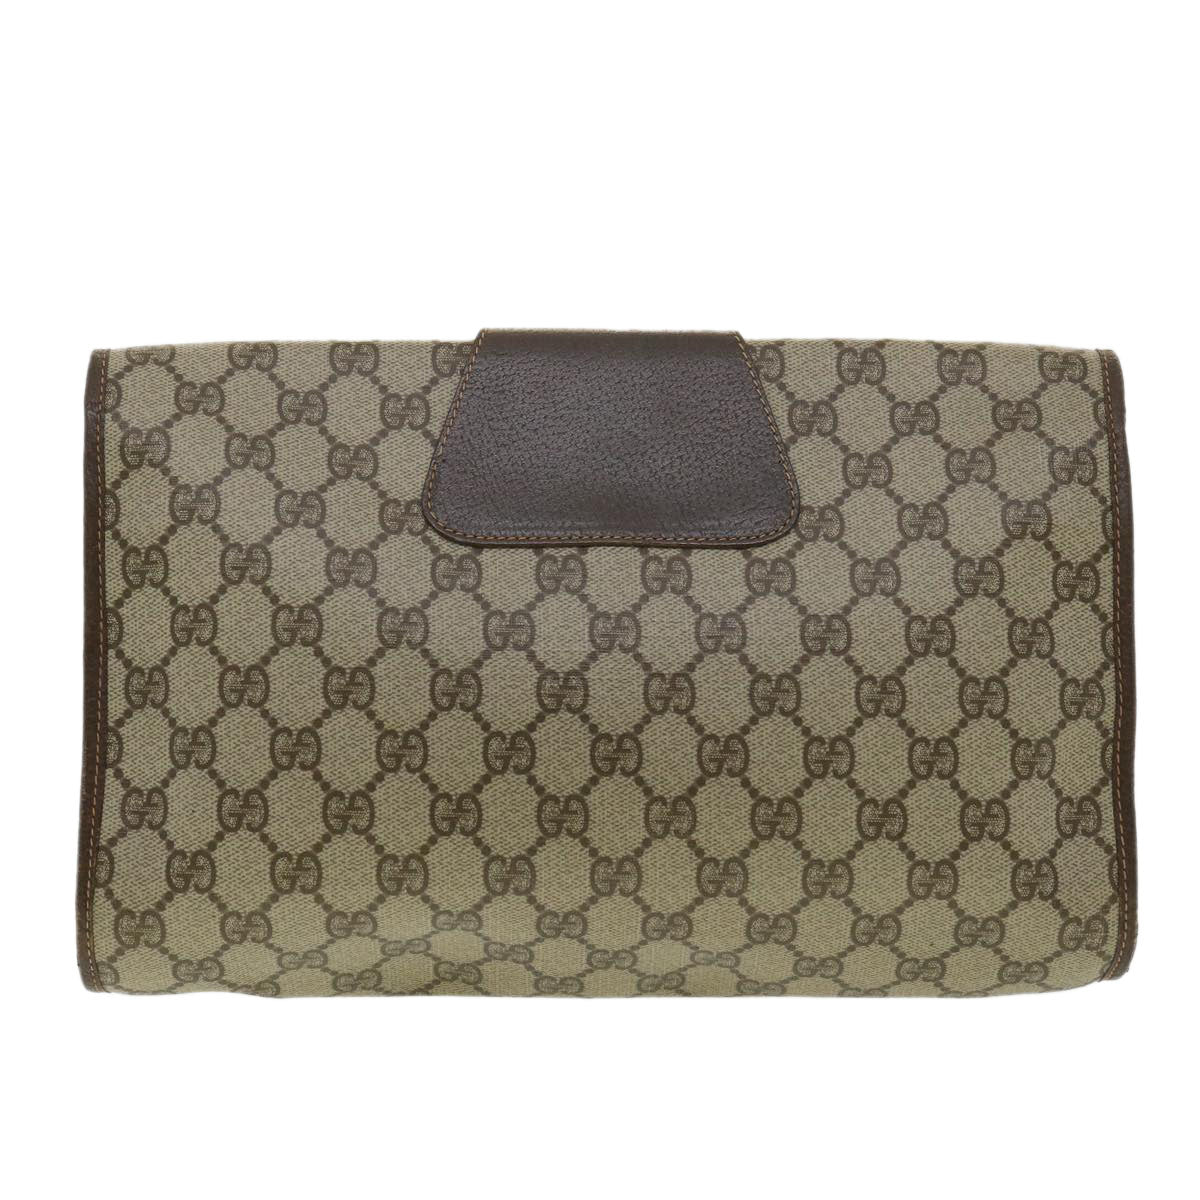 GUCCI GG Canvas Web Sherry Line Clutch Bag Beige Red Green 15601031 Auth 32362 - 0